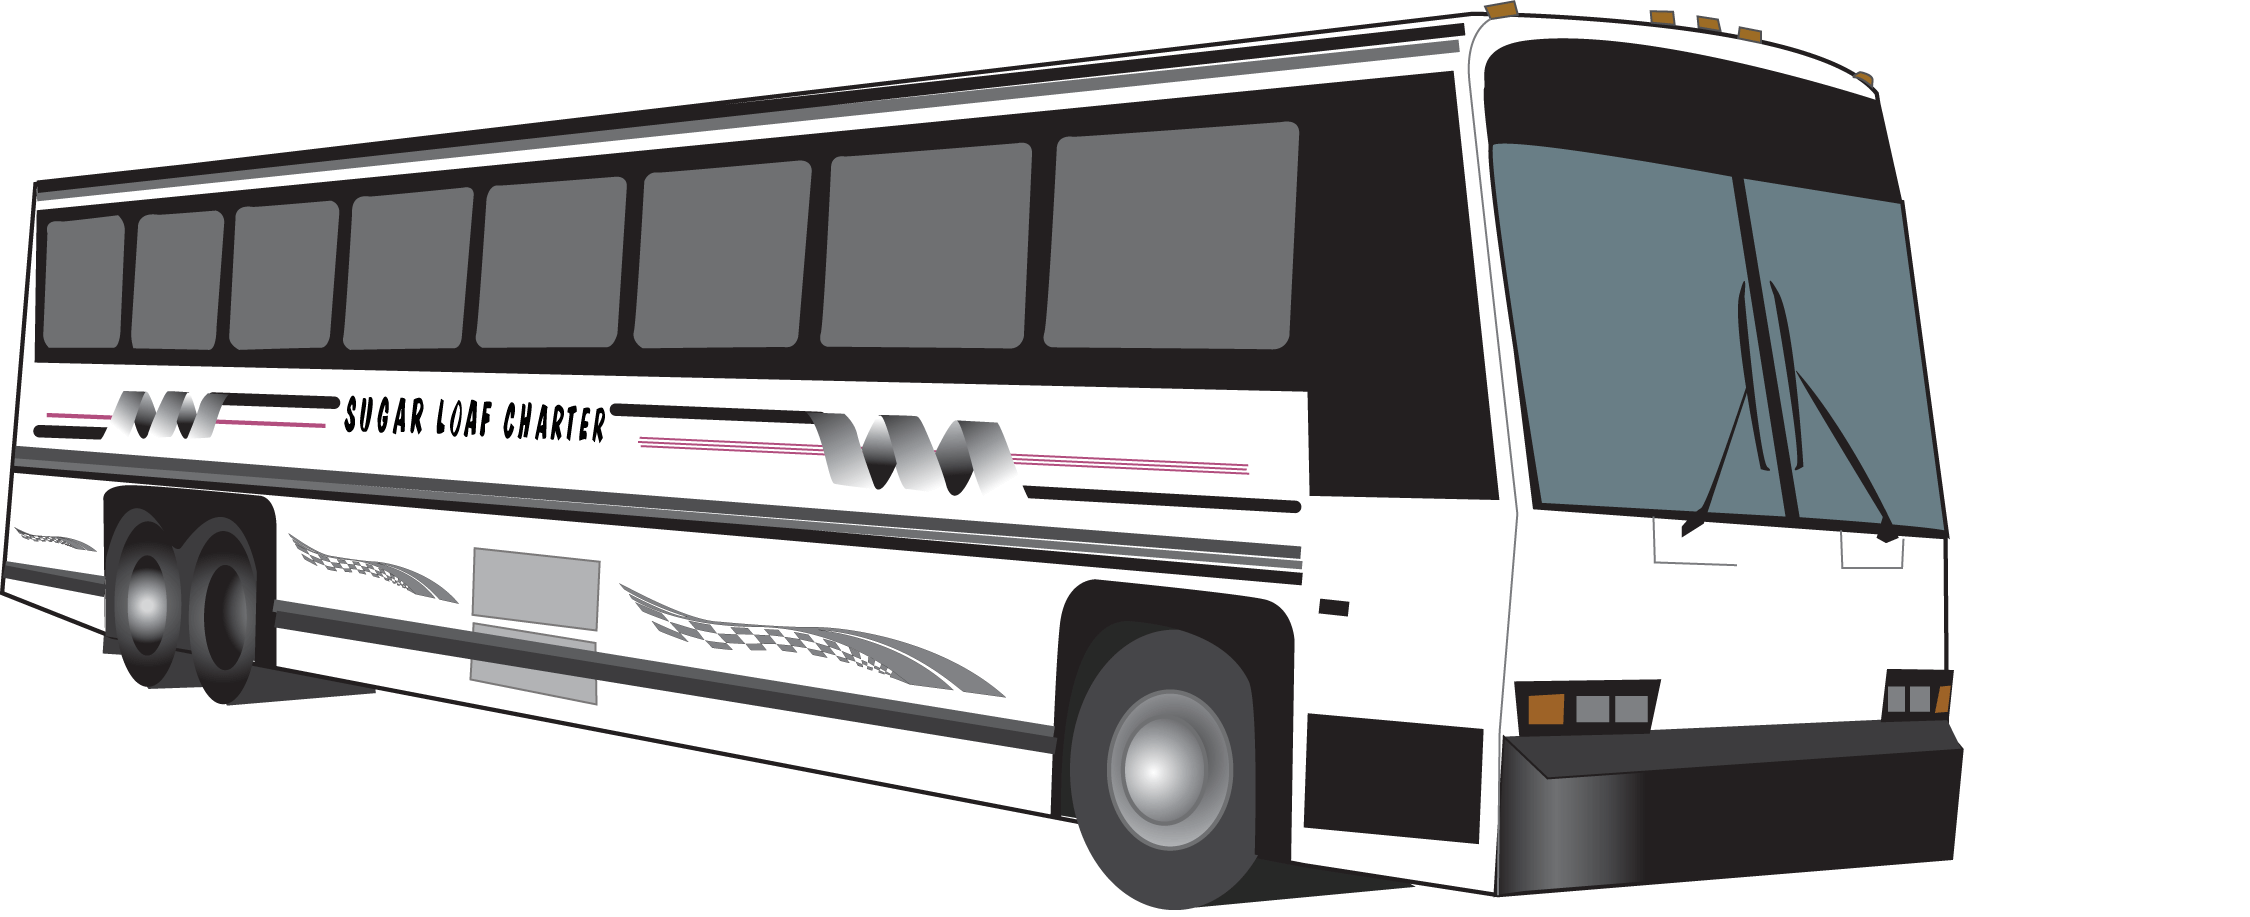 charter bus clipart - photo #19